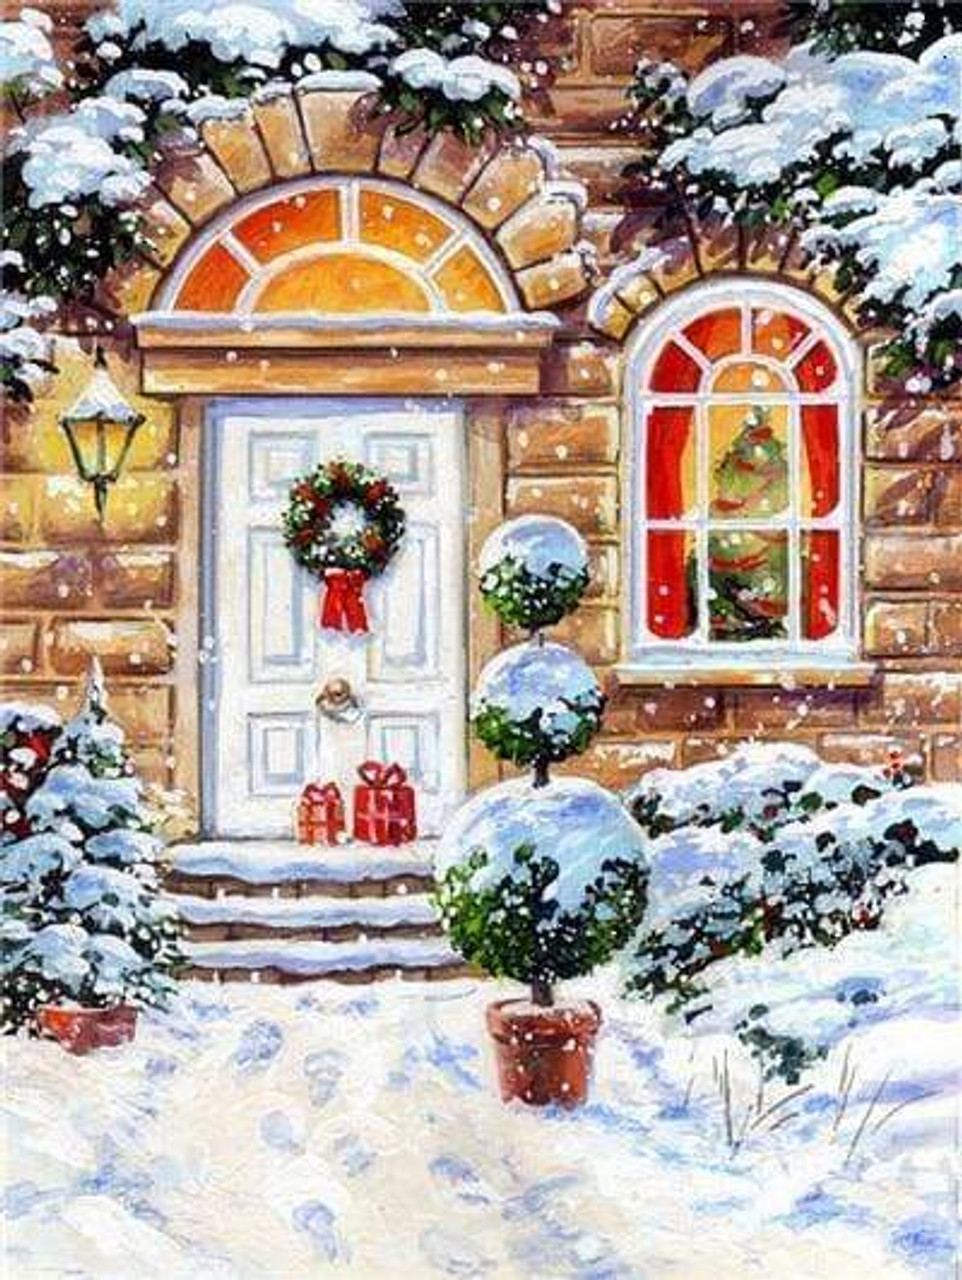 Sparkly Selections House & Christmas Tree Pre-Framed Diamond Painting Kit  with Backlighting